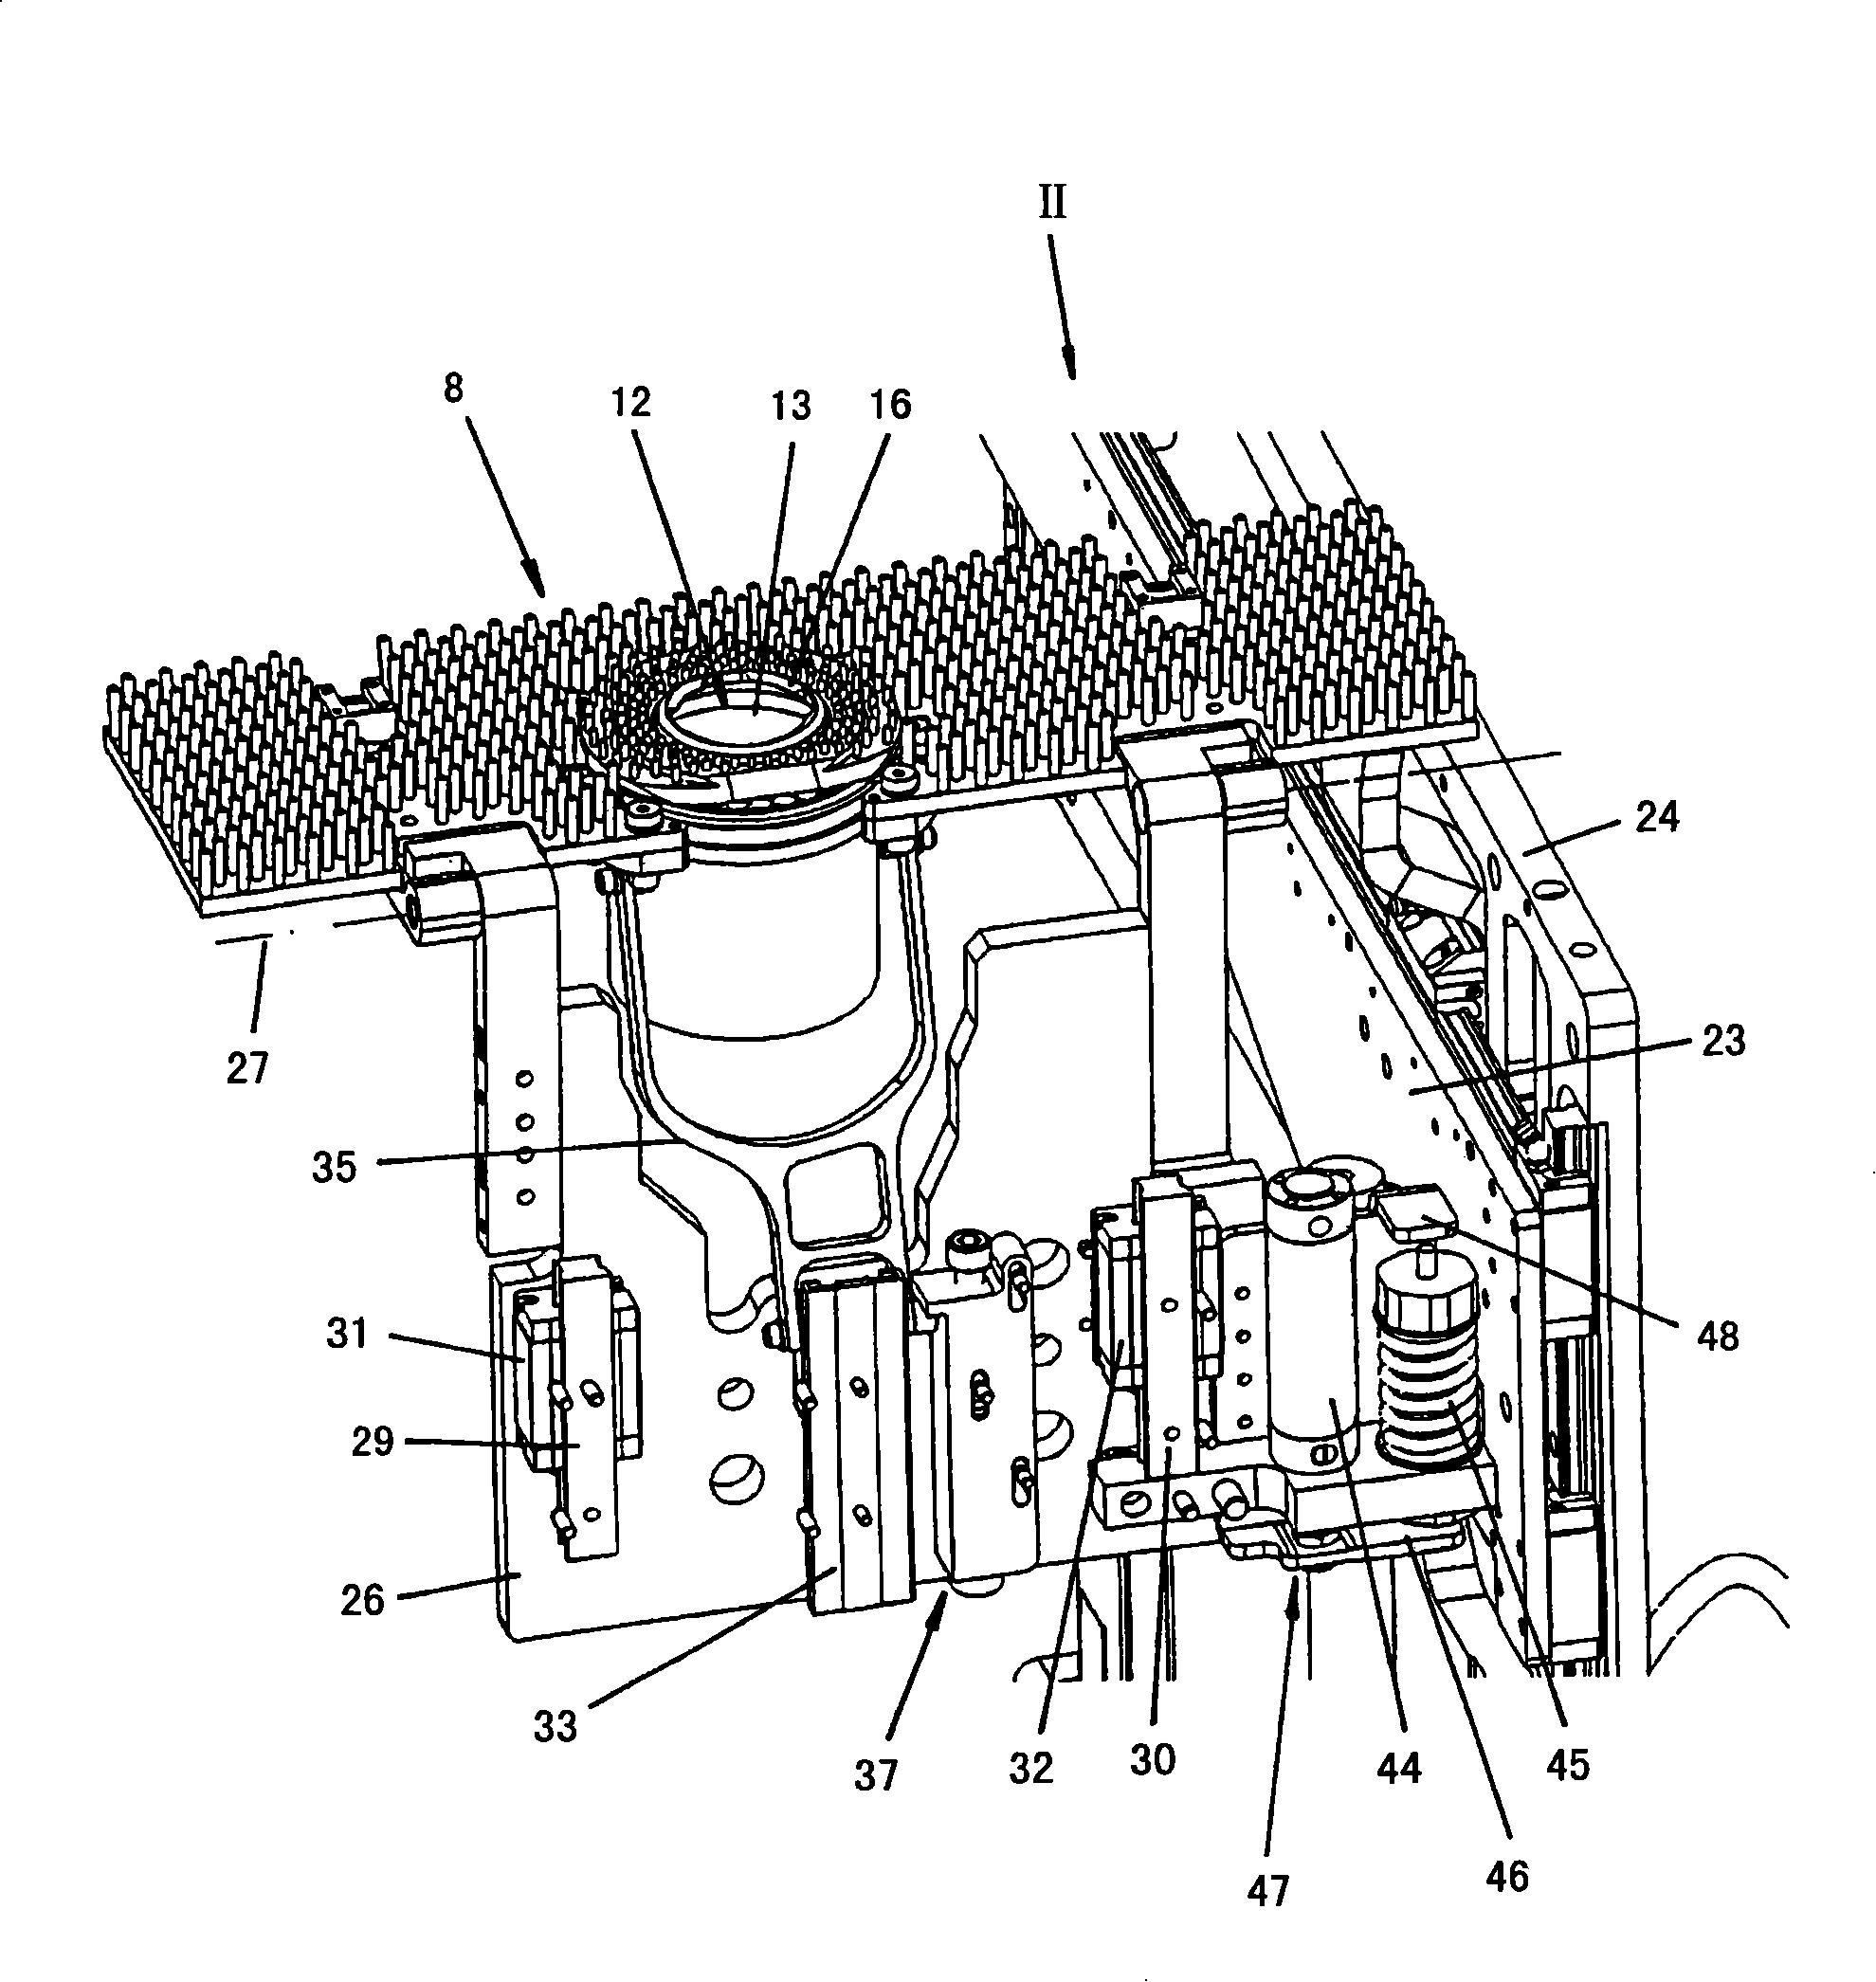 Laser processing machine for machining workpieces and machine method for machining workpieces using a laser beam